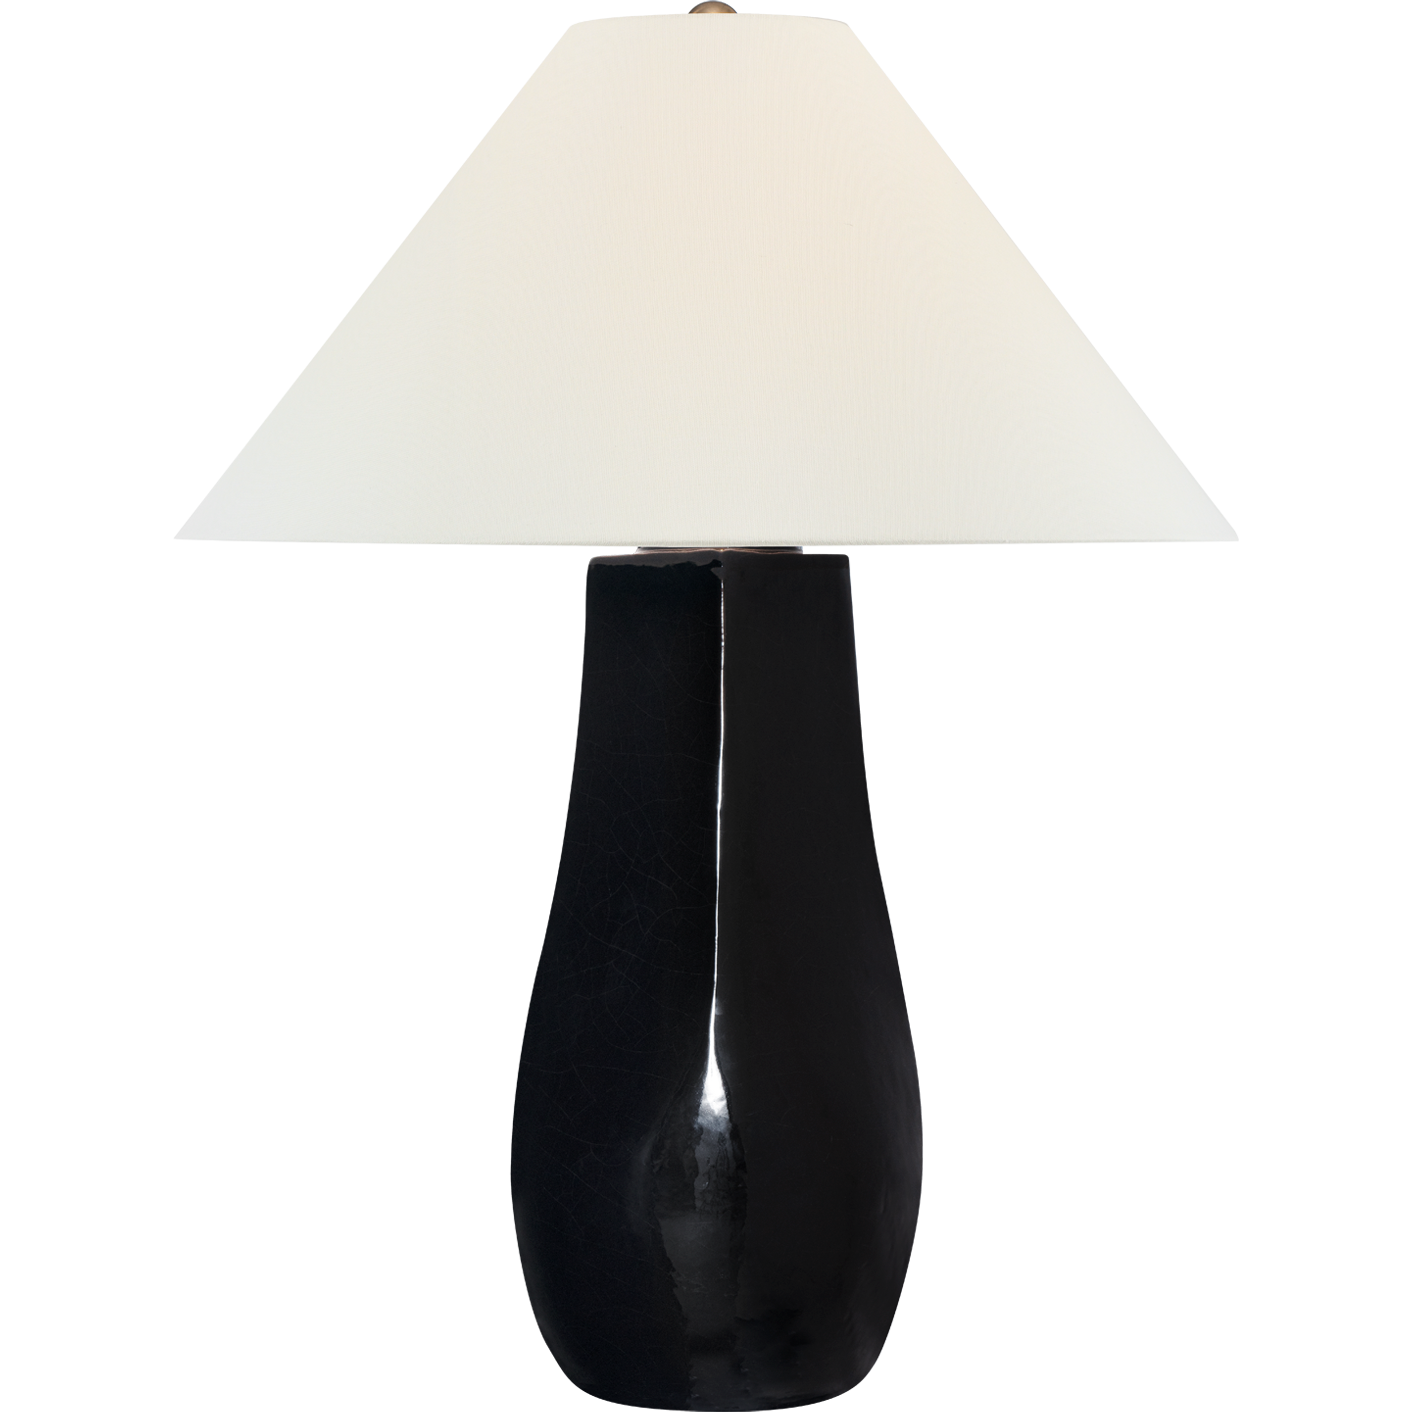 Cabazon 30" Table Lamp